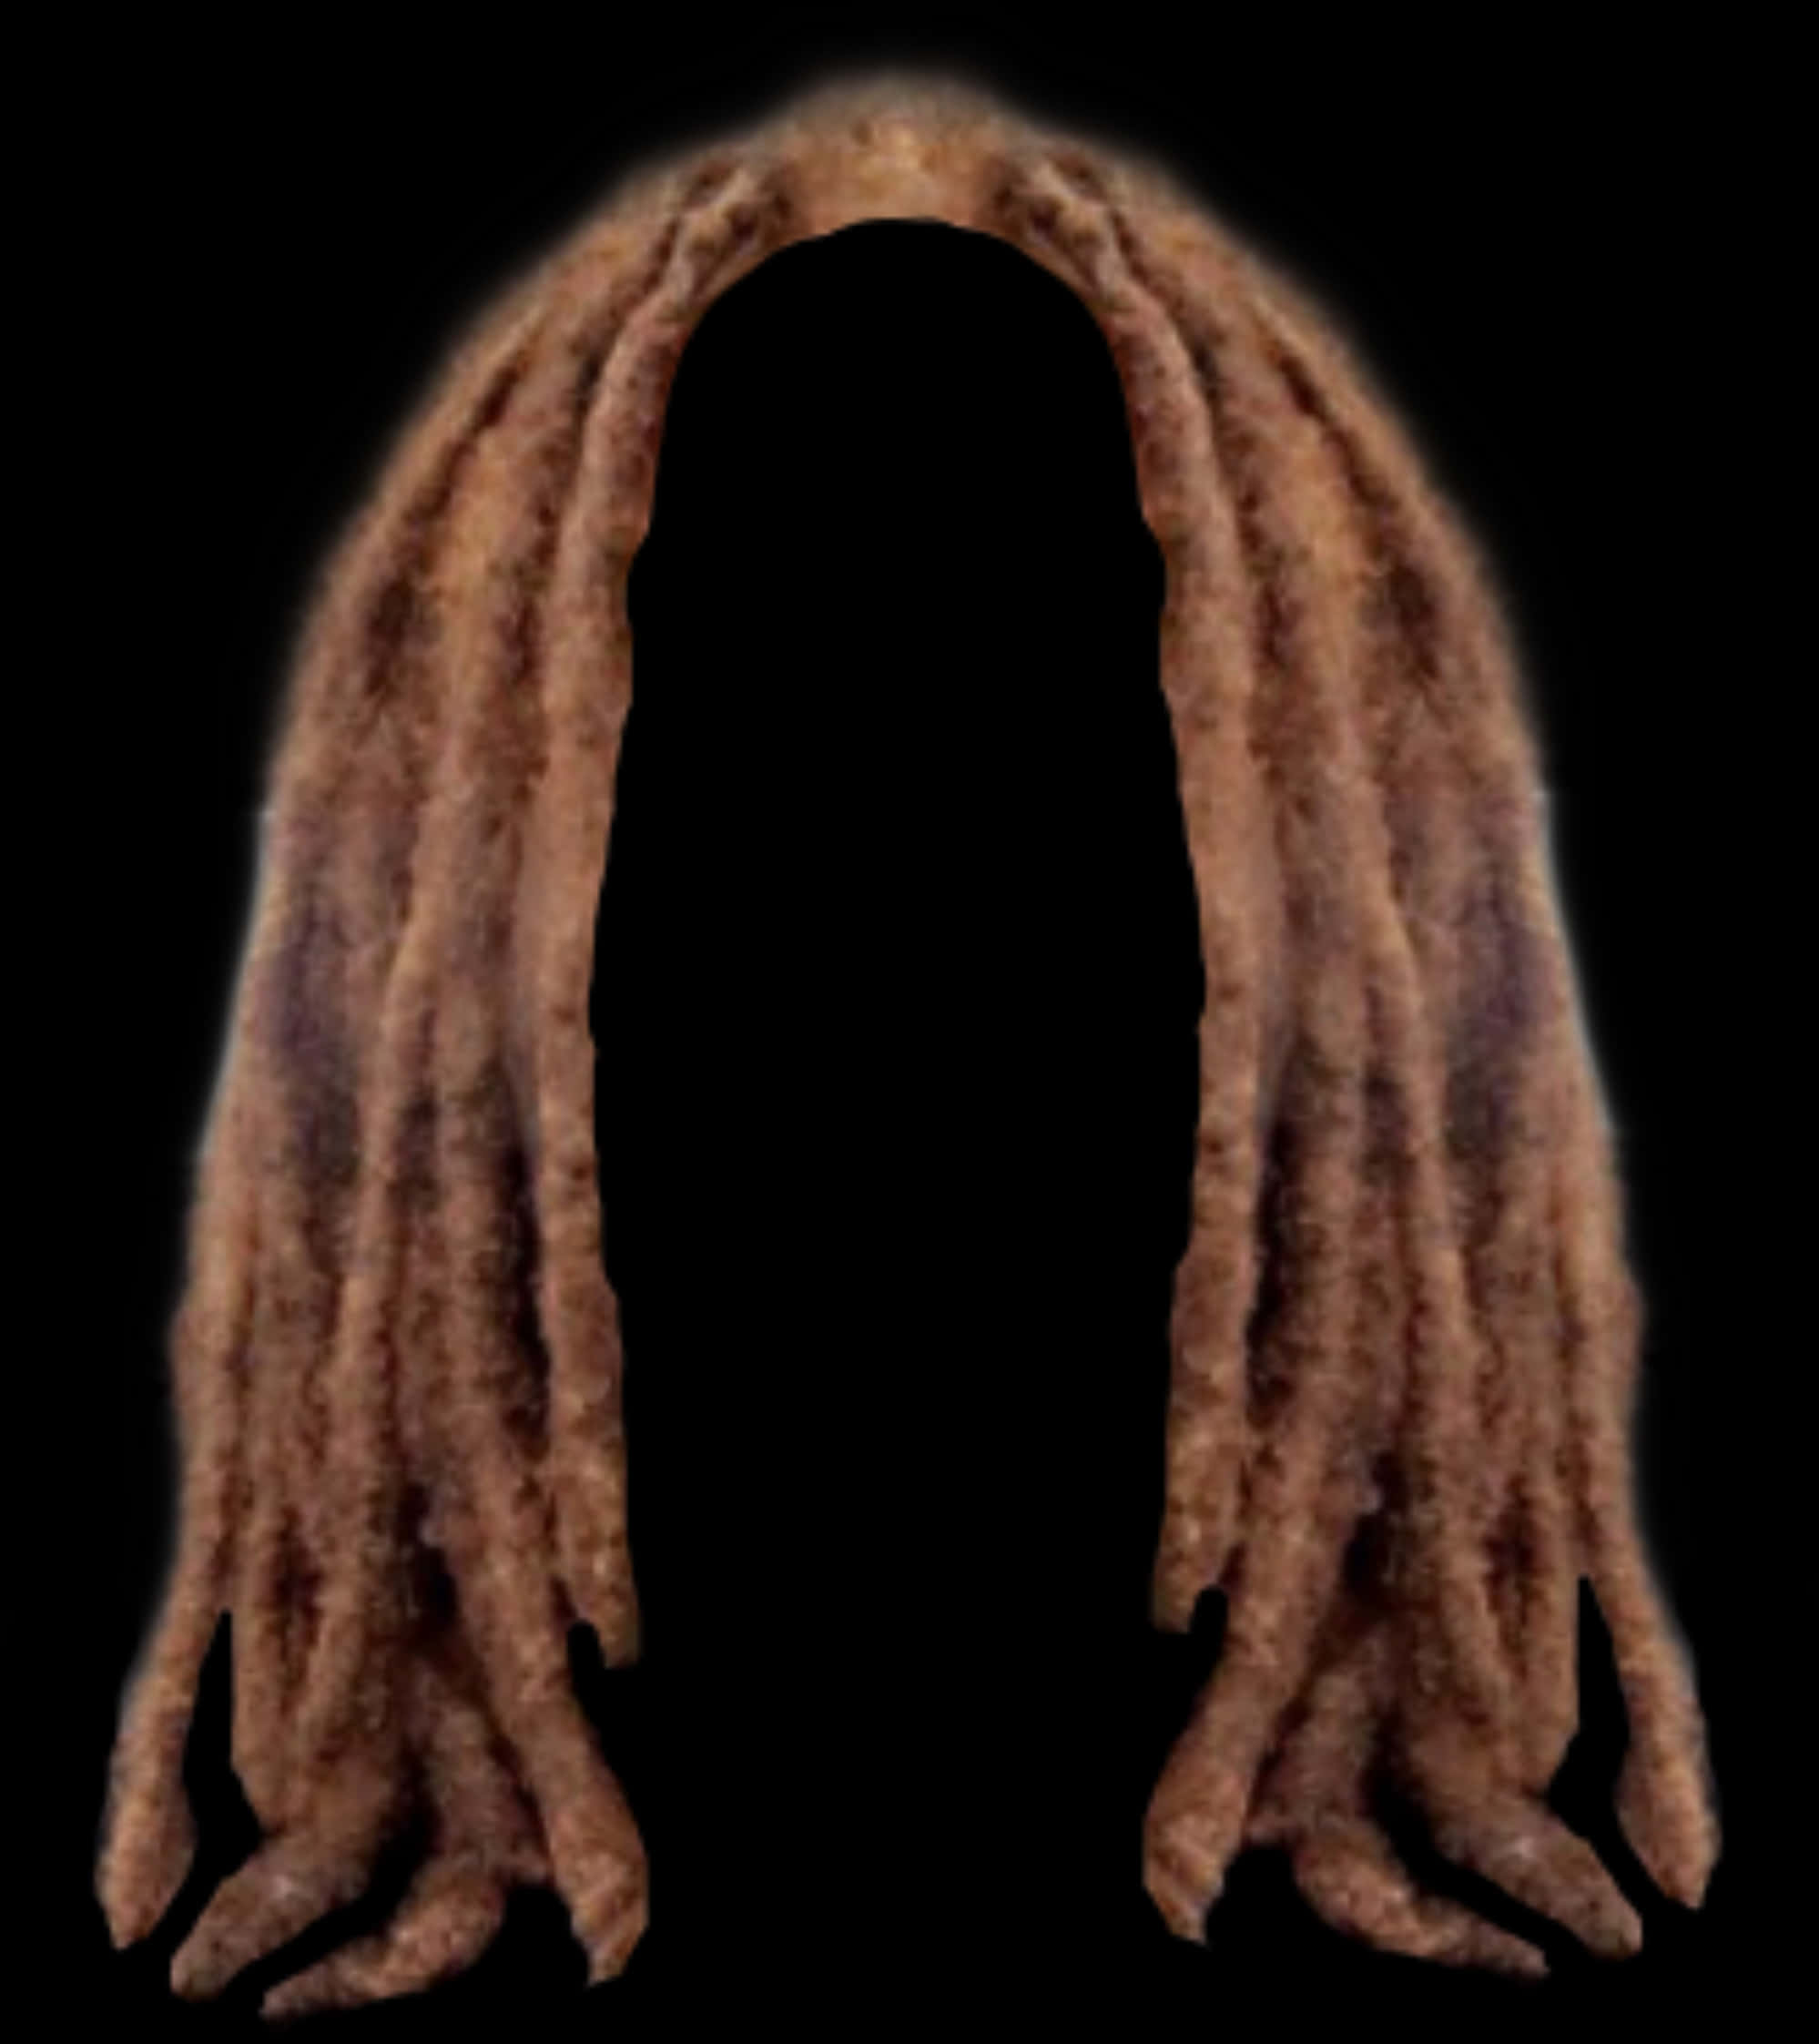 A Person's Hair With A Black Background